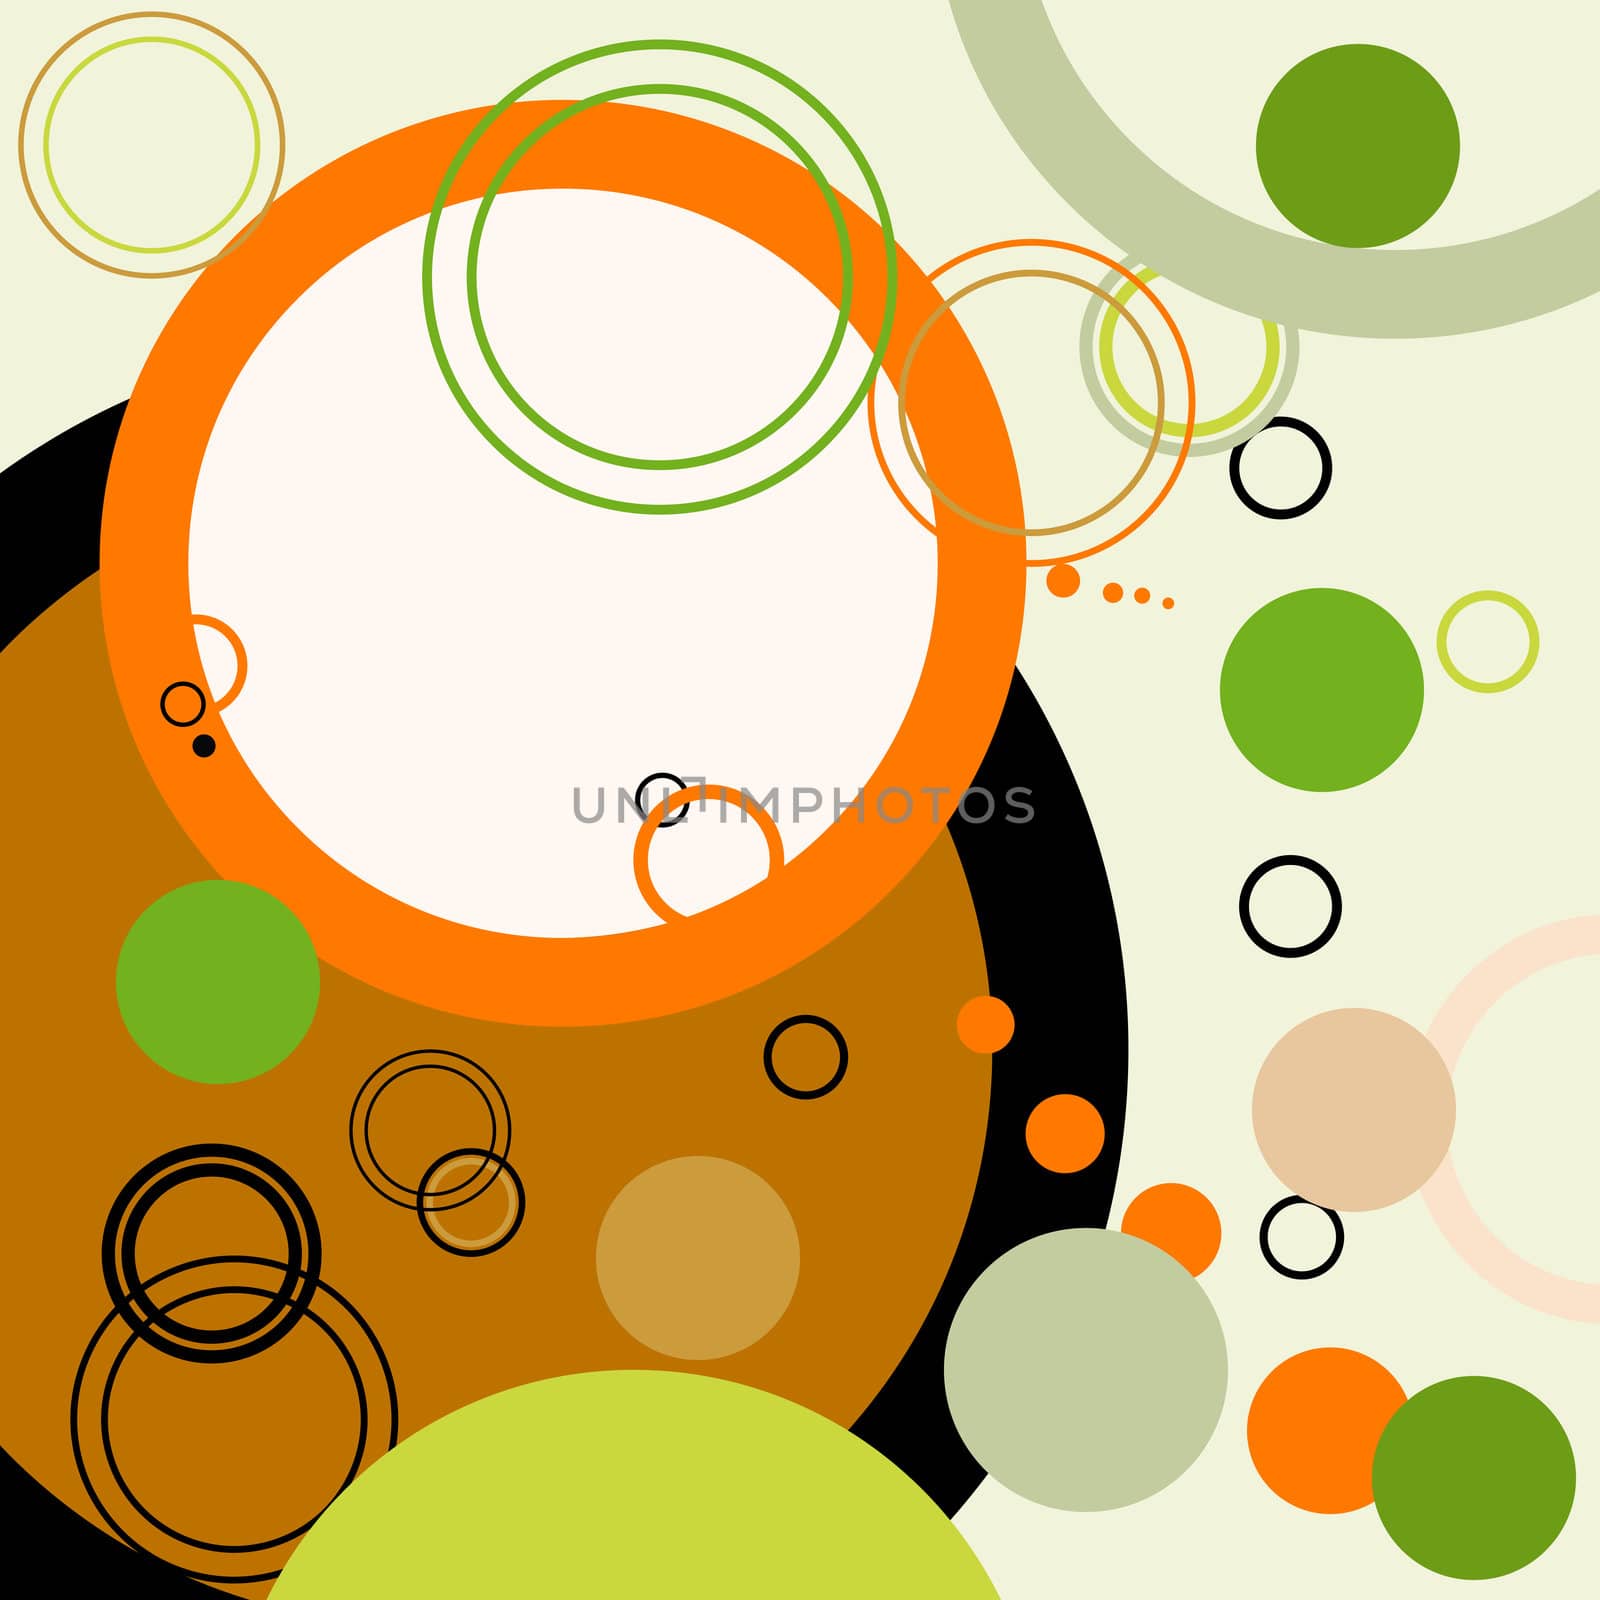 Abstract retro background with circles